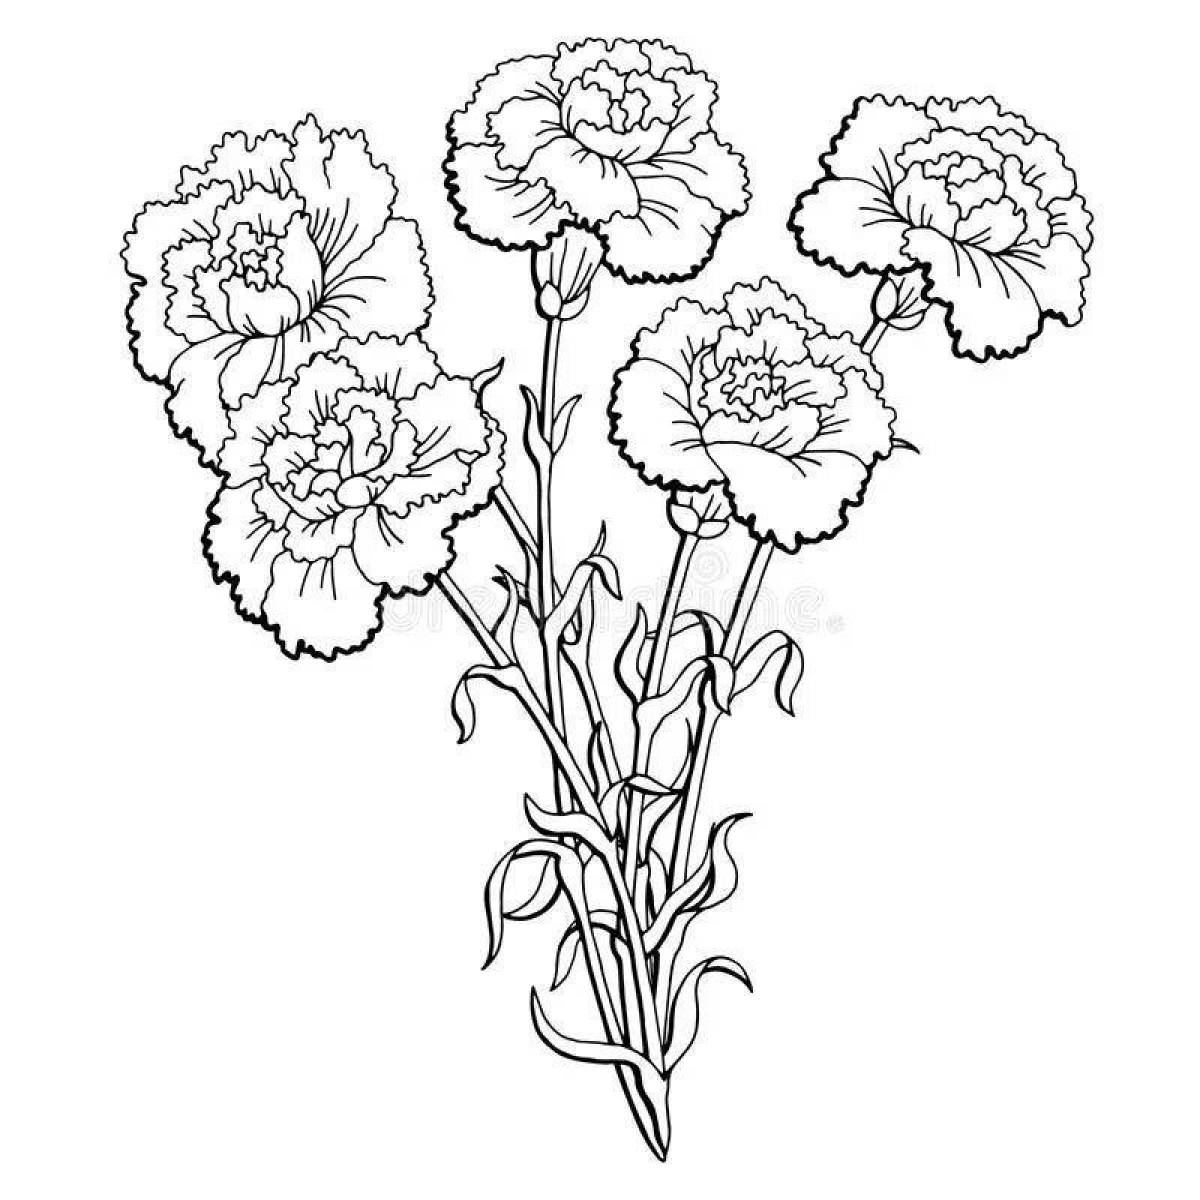 Exquisite carnations on May 9 Victory Day